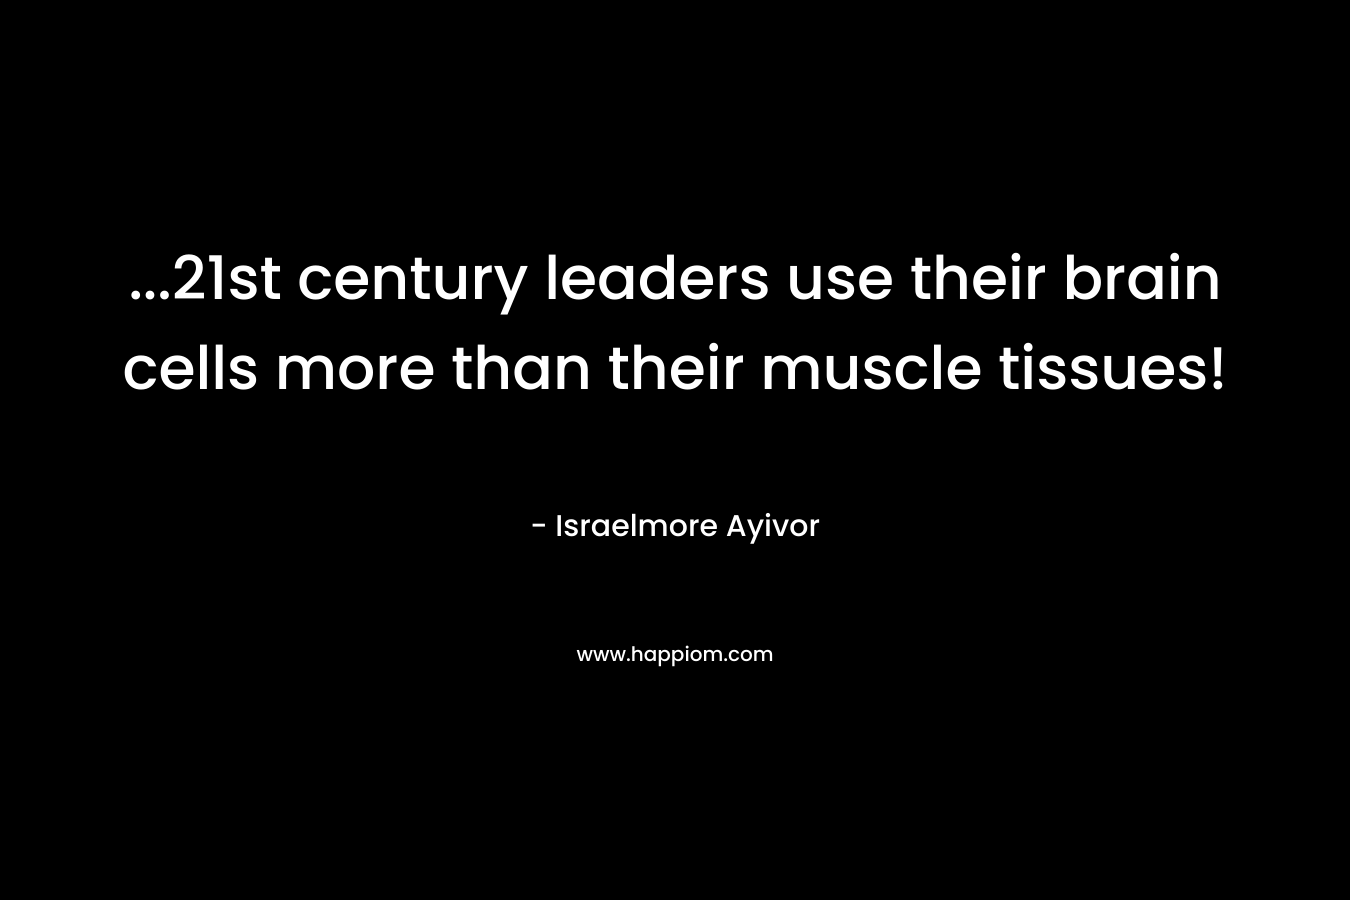 …21st century leaders use their brain cells more than their muscle tissues! – Israelmore Ayivor